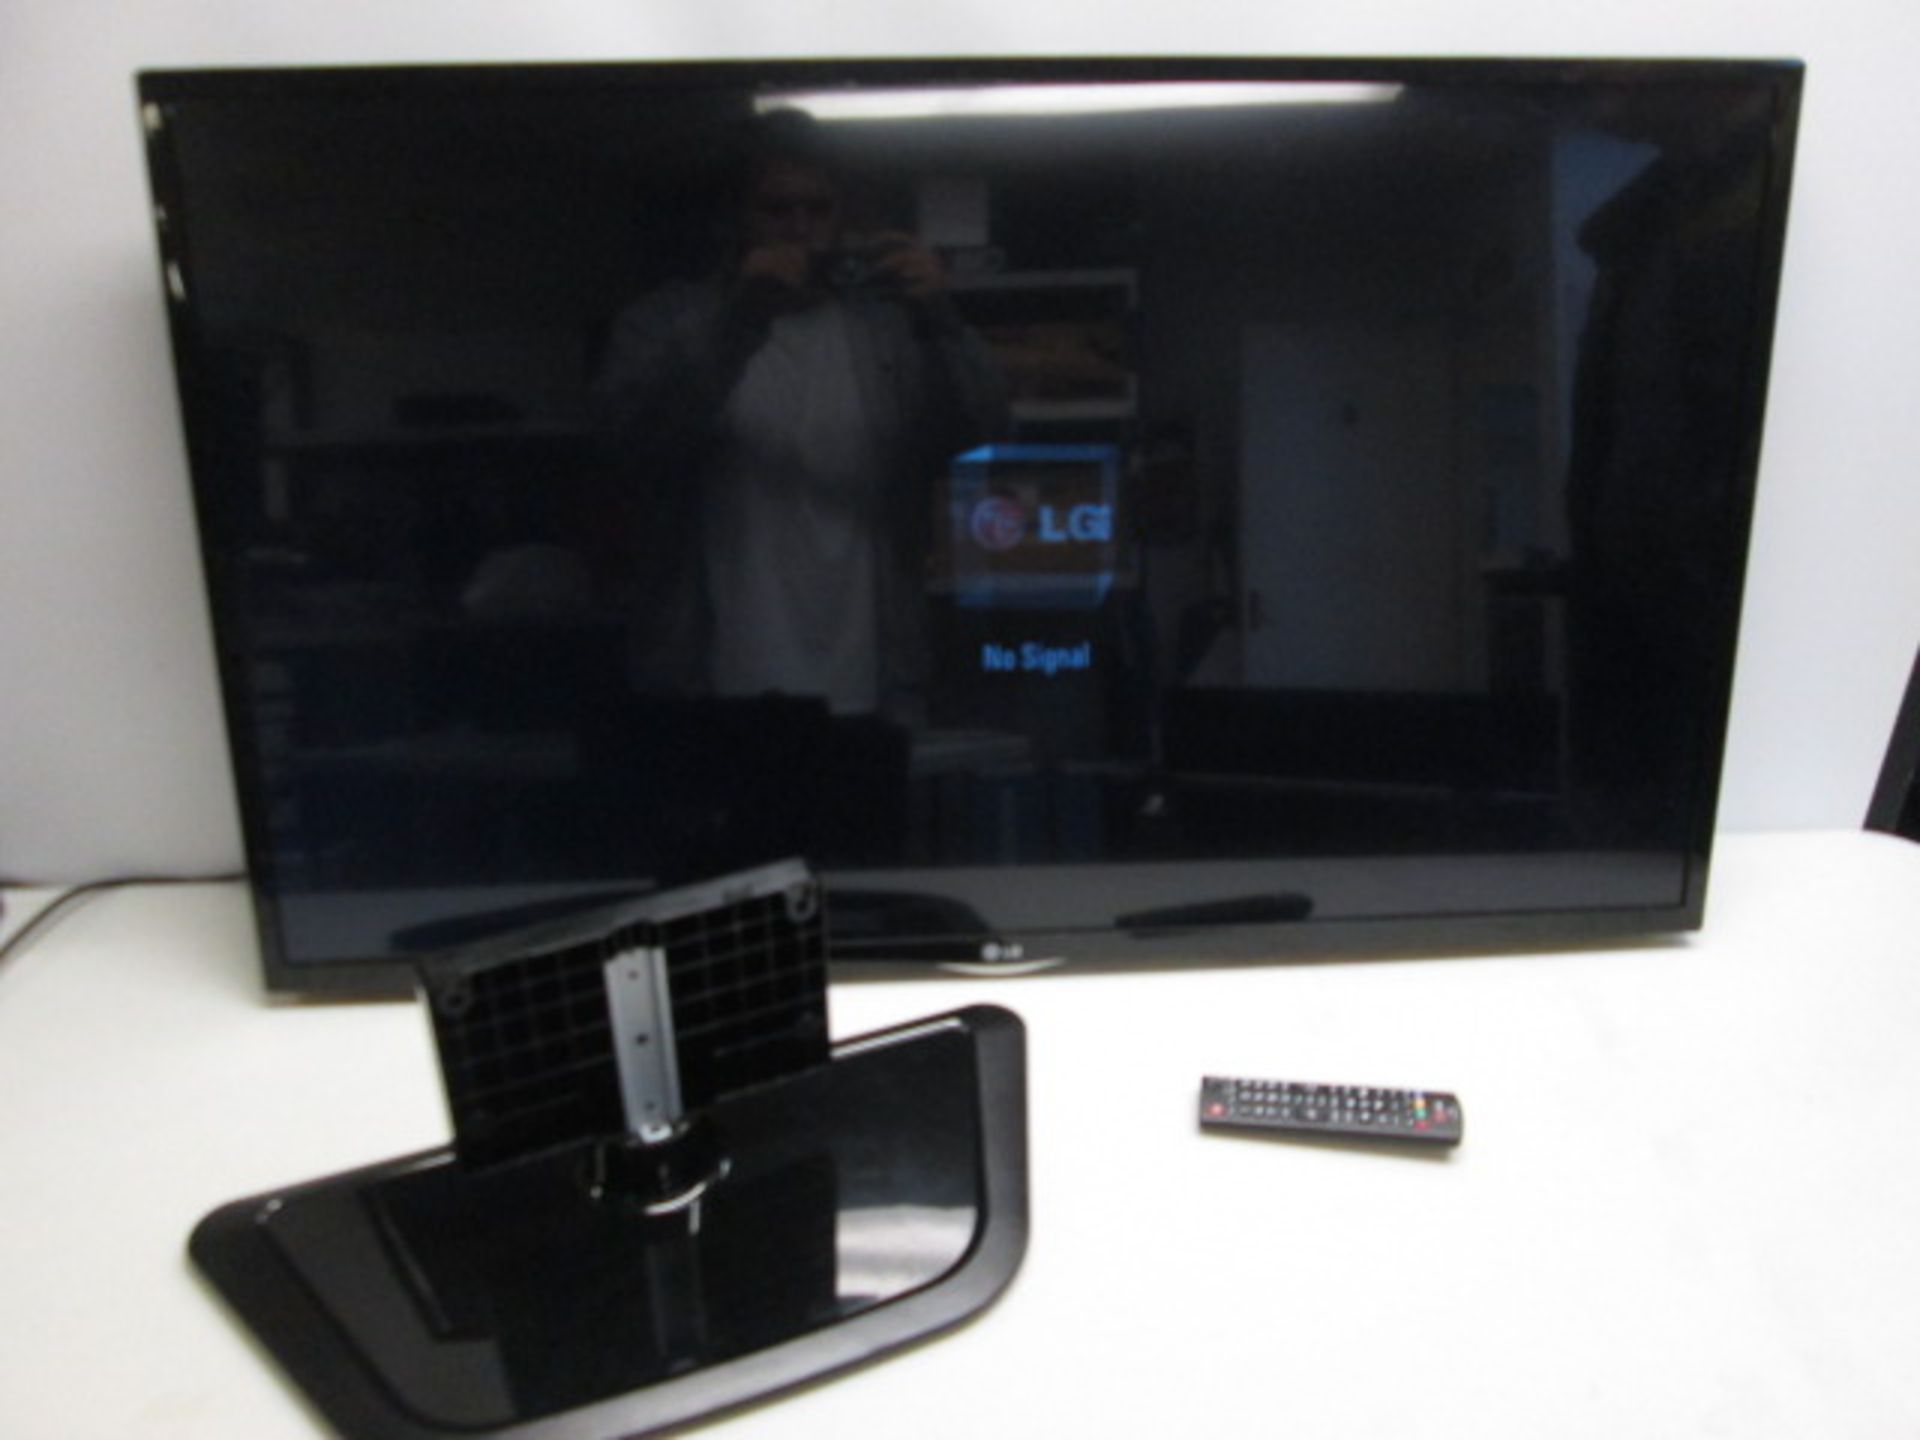 LG 47" LED Flat screen TV, Model LN549C. Comes with Stand & Remote.